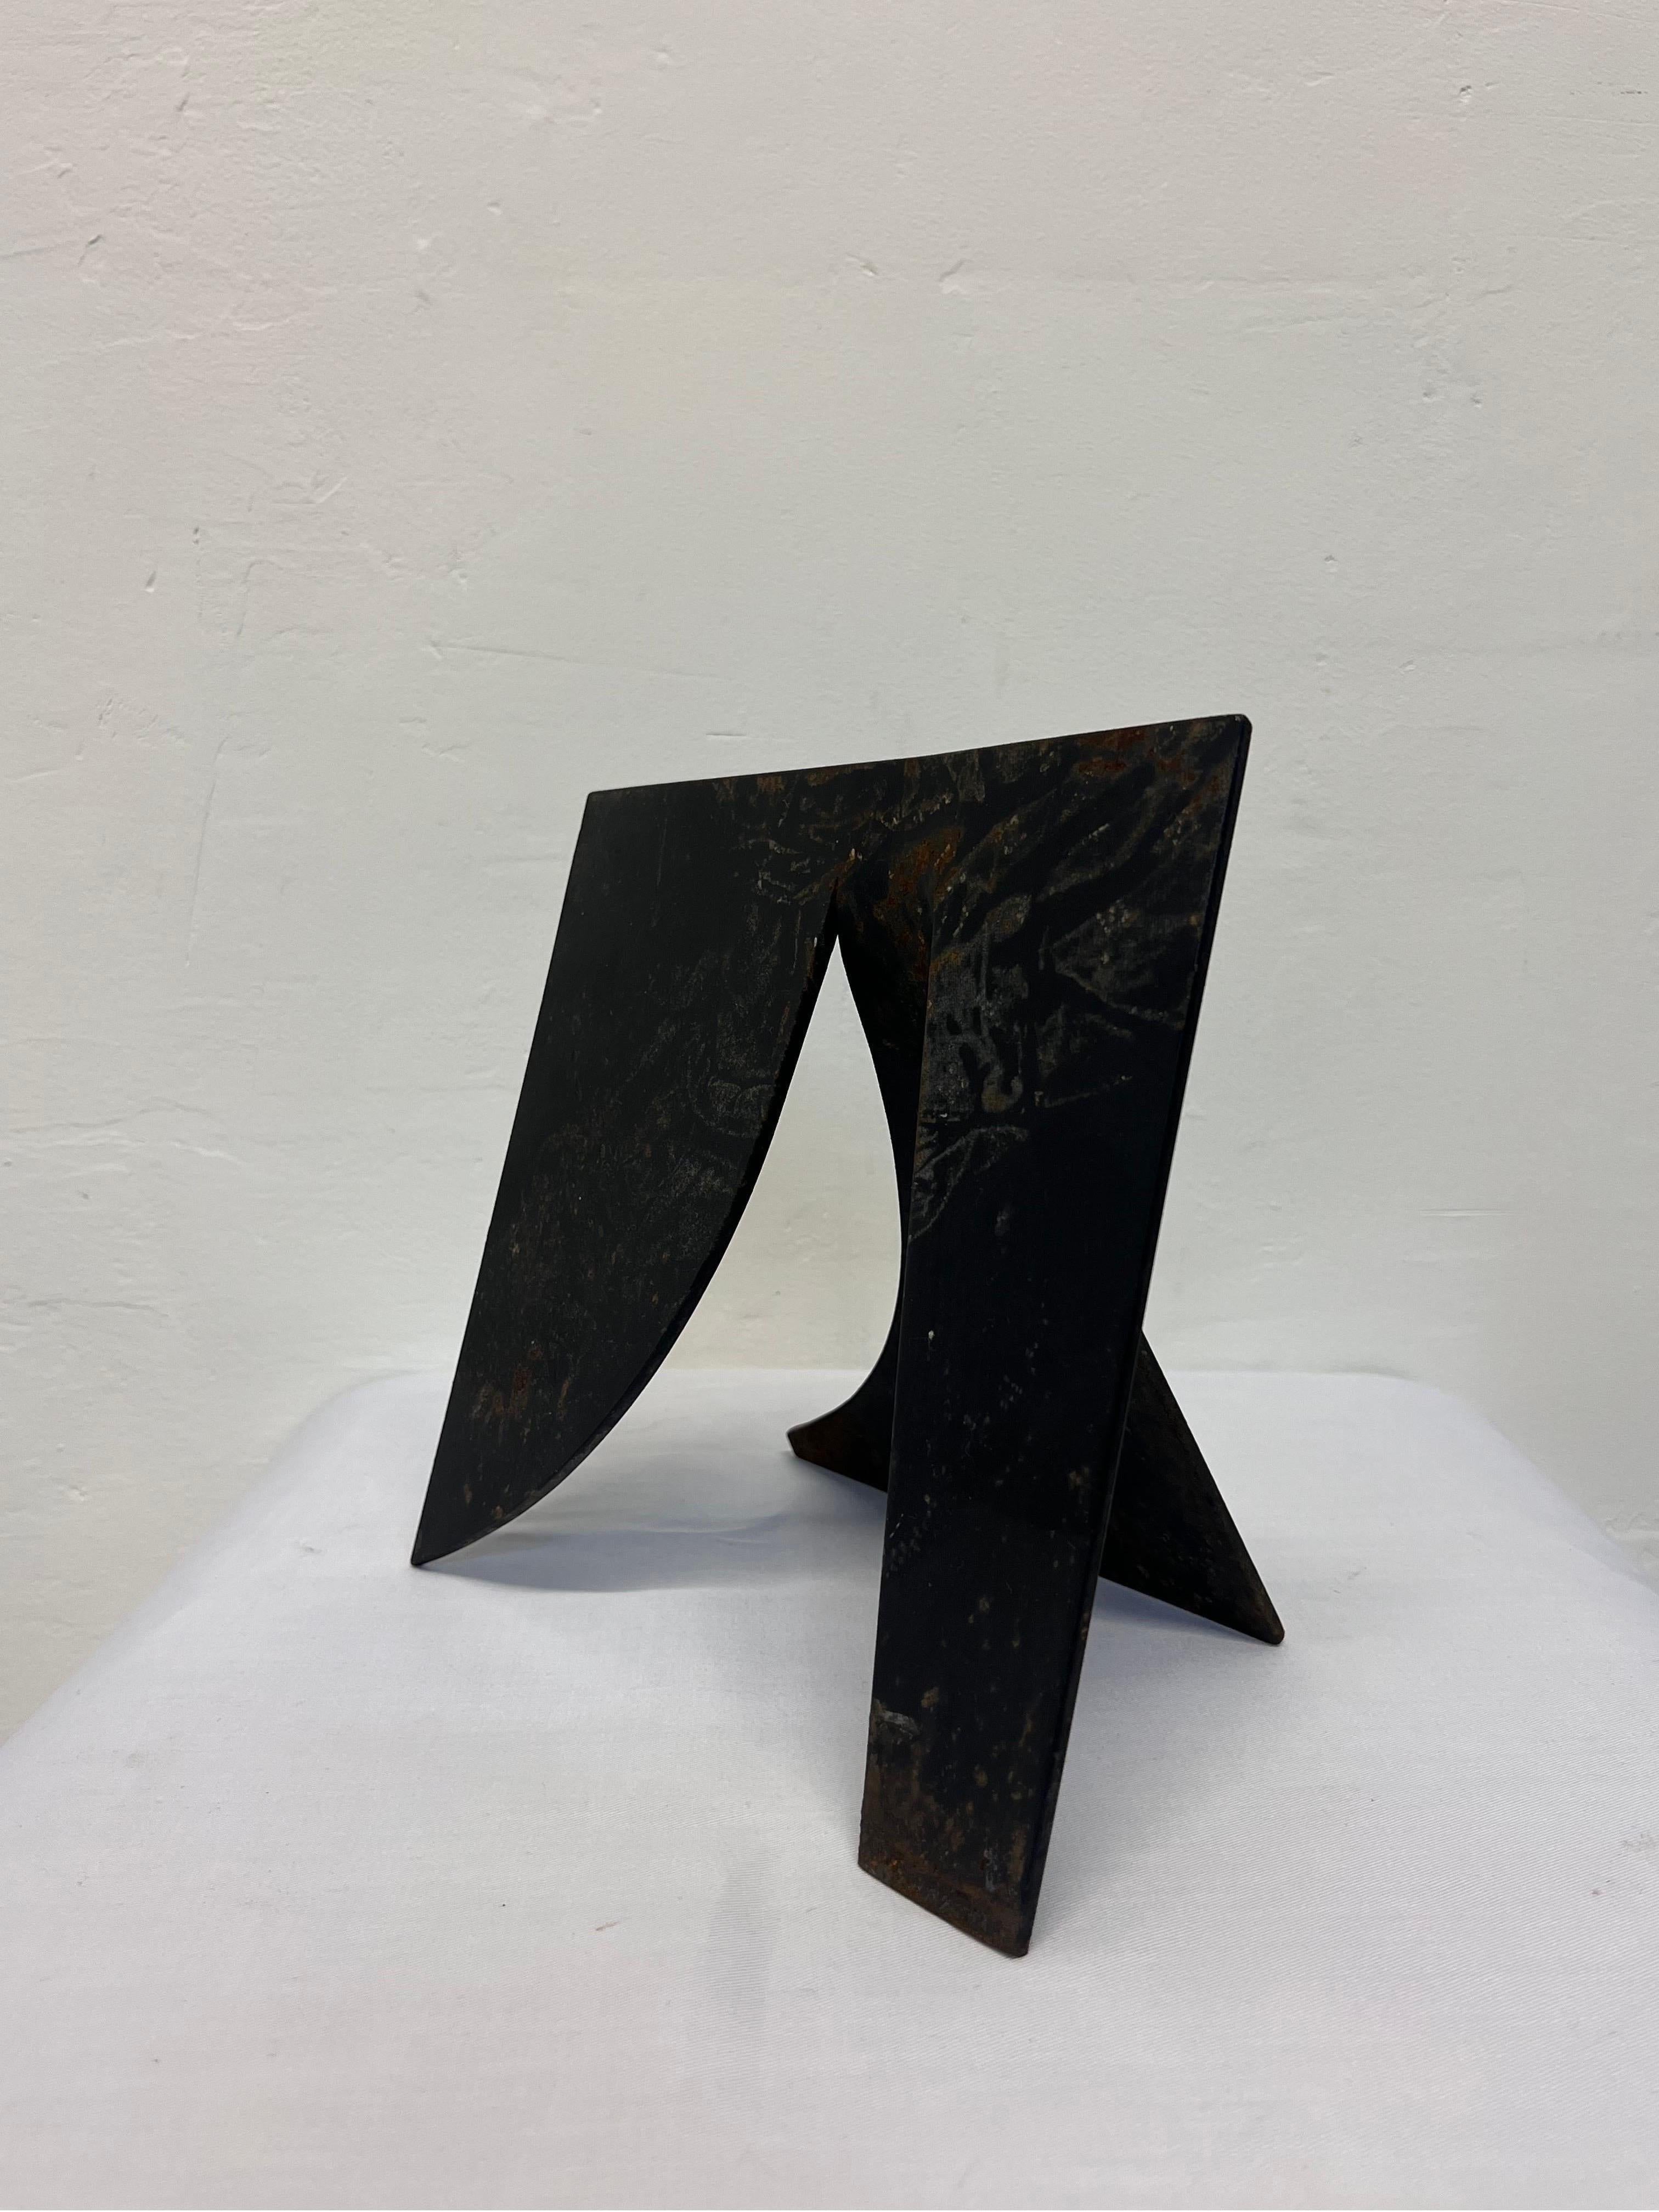 Brazilian Modern Black Steel Abstract Table Sculpture, 1980s For Sale 4